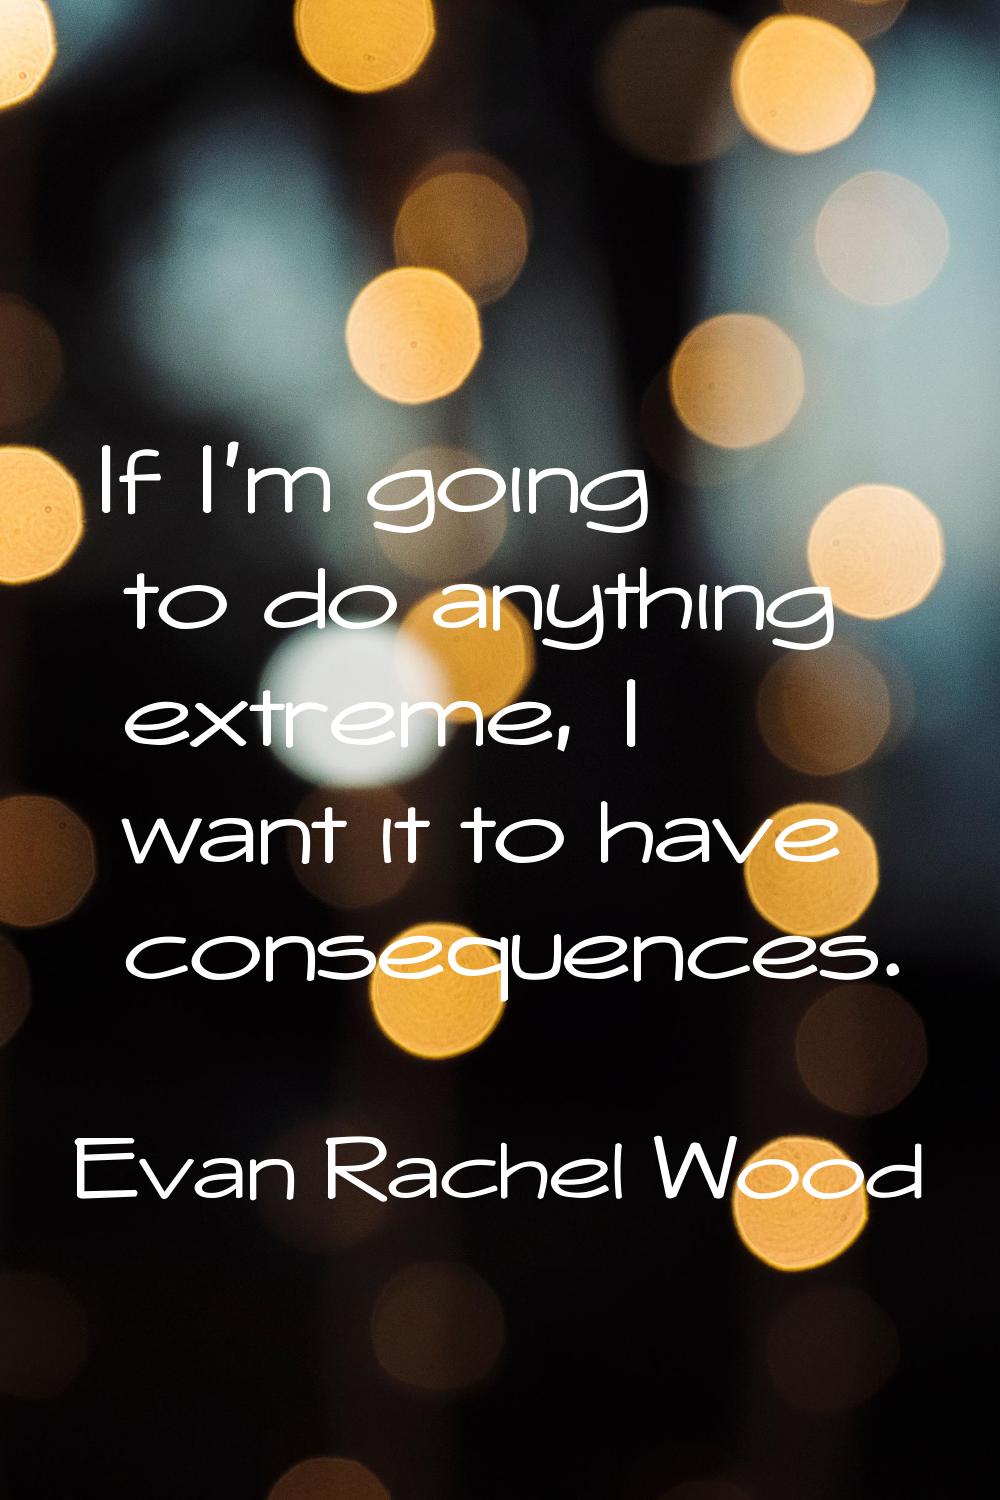 If I'm going to do anything extreme, I want it to have consequences.